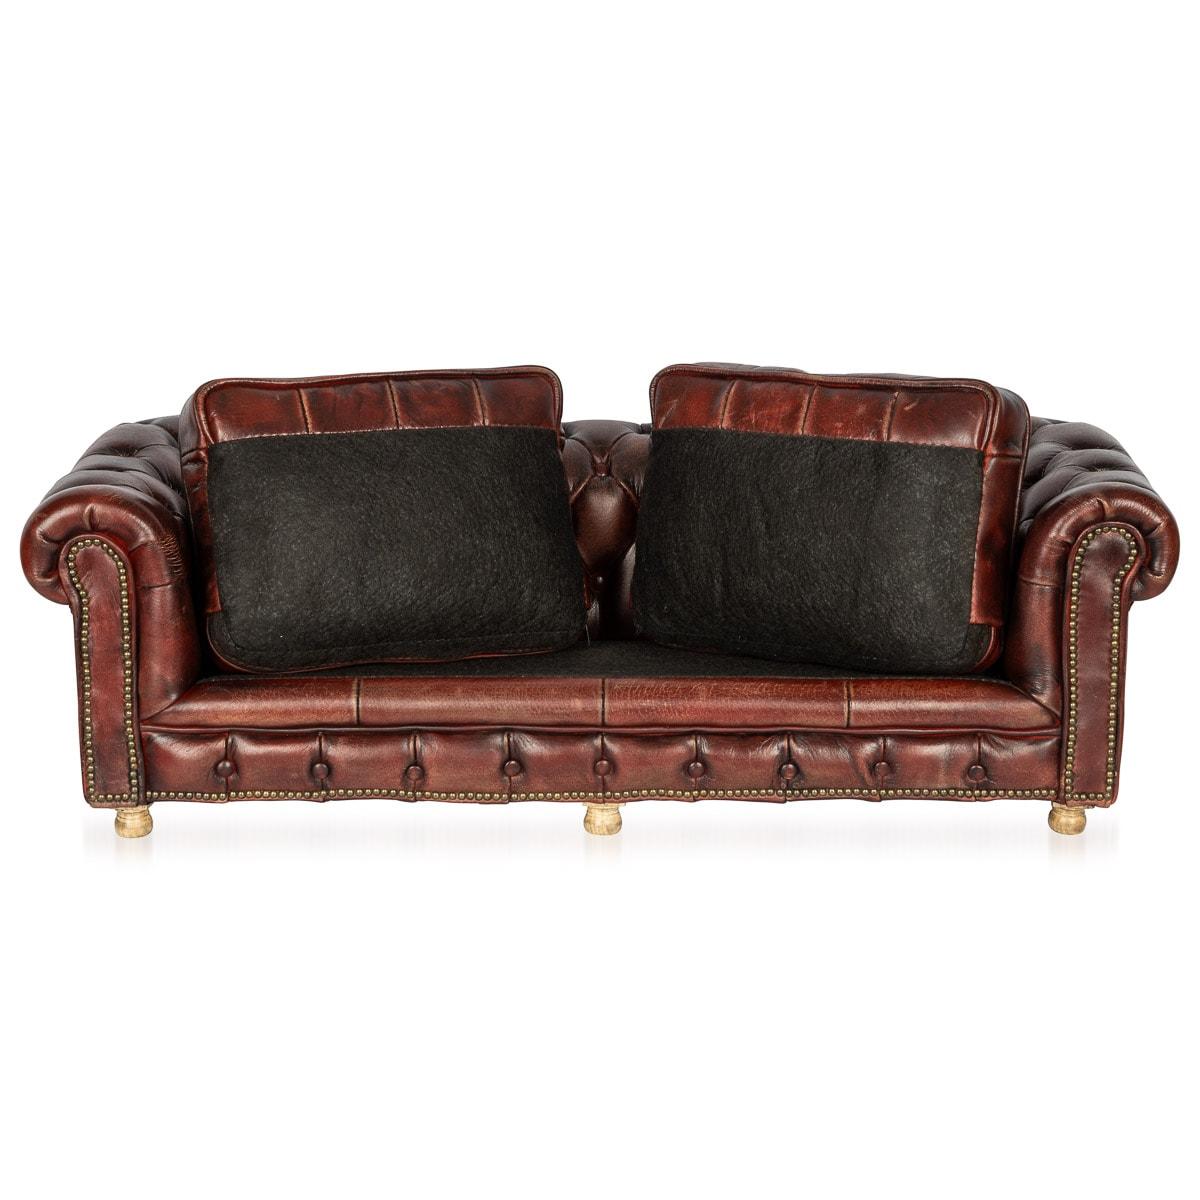 British 20th Century English Chesterfield Miniature Leather Sofa With Cushion Seats For Sale